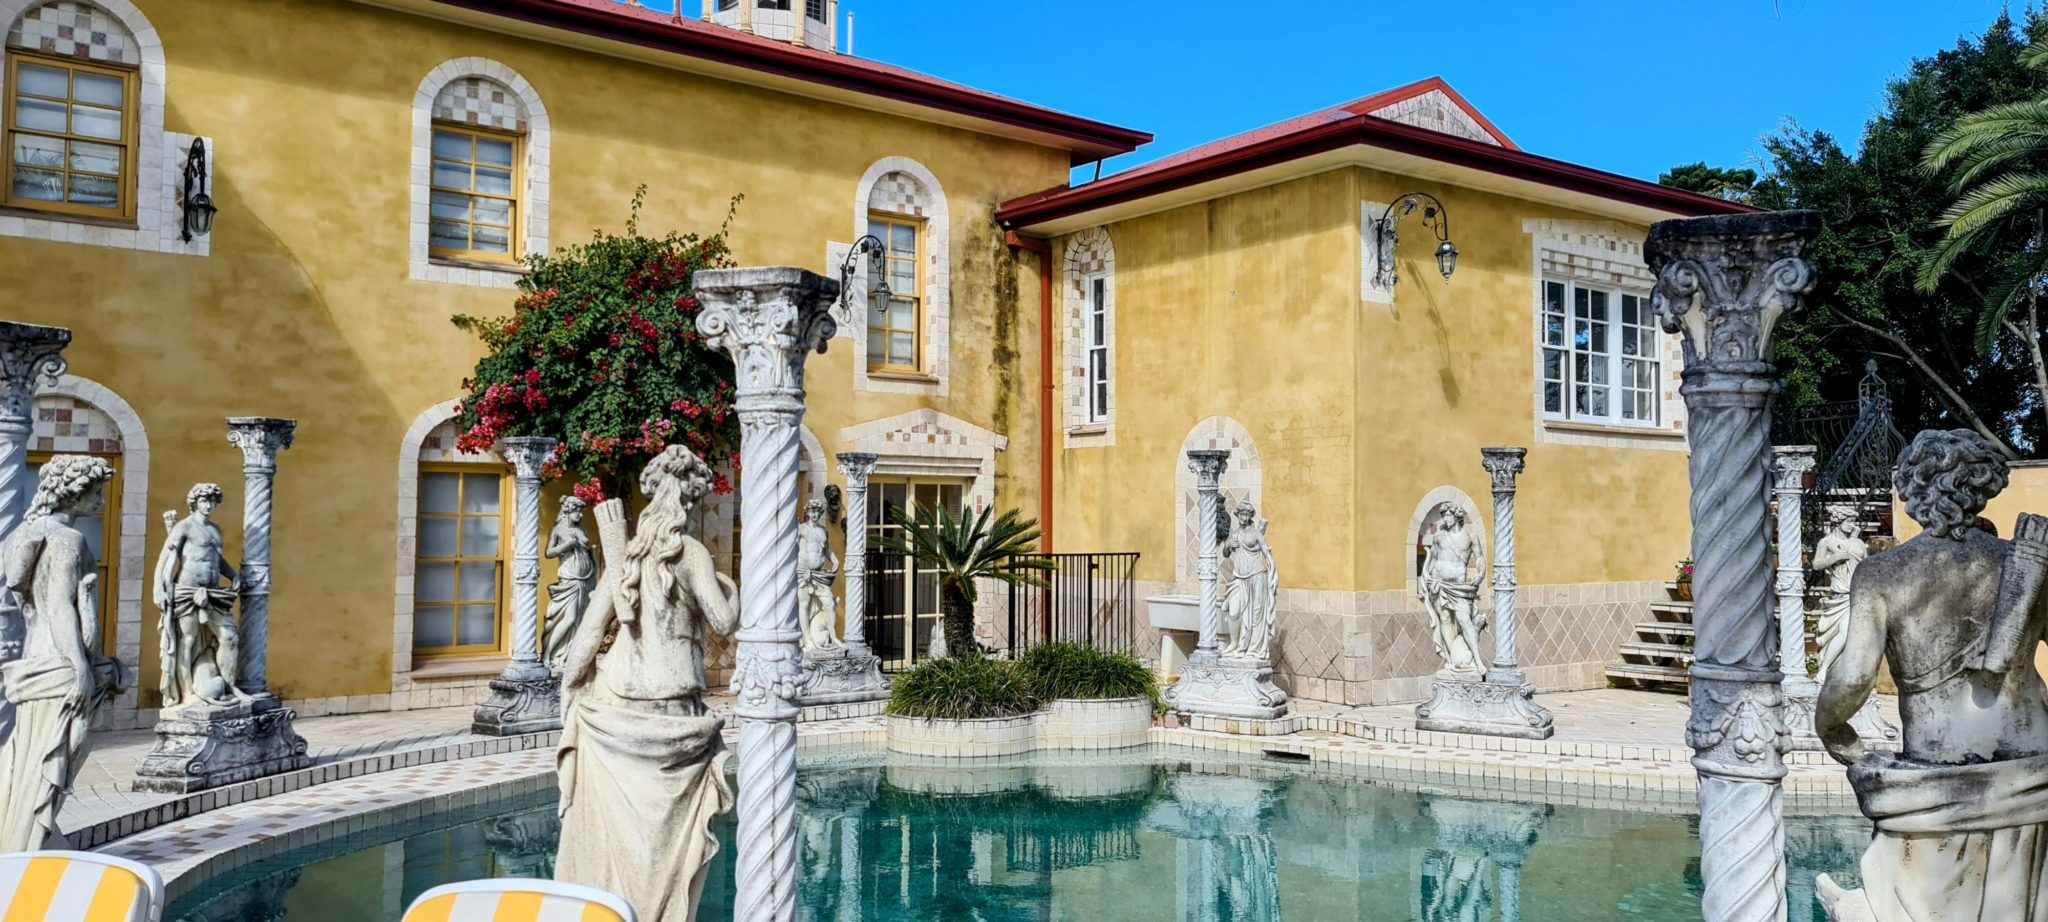 Palazzo Sophia Celestial – Outdoor areas only